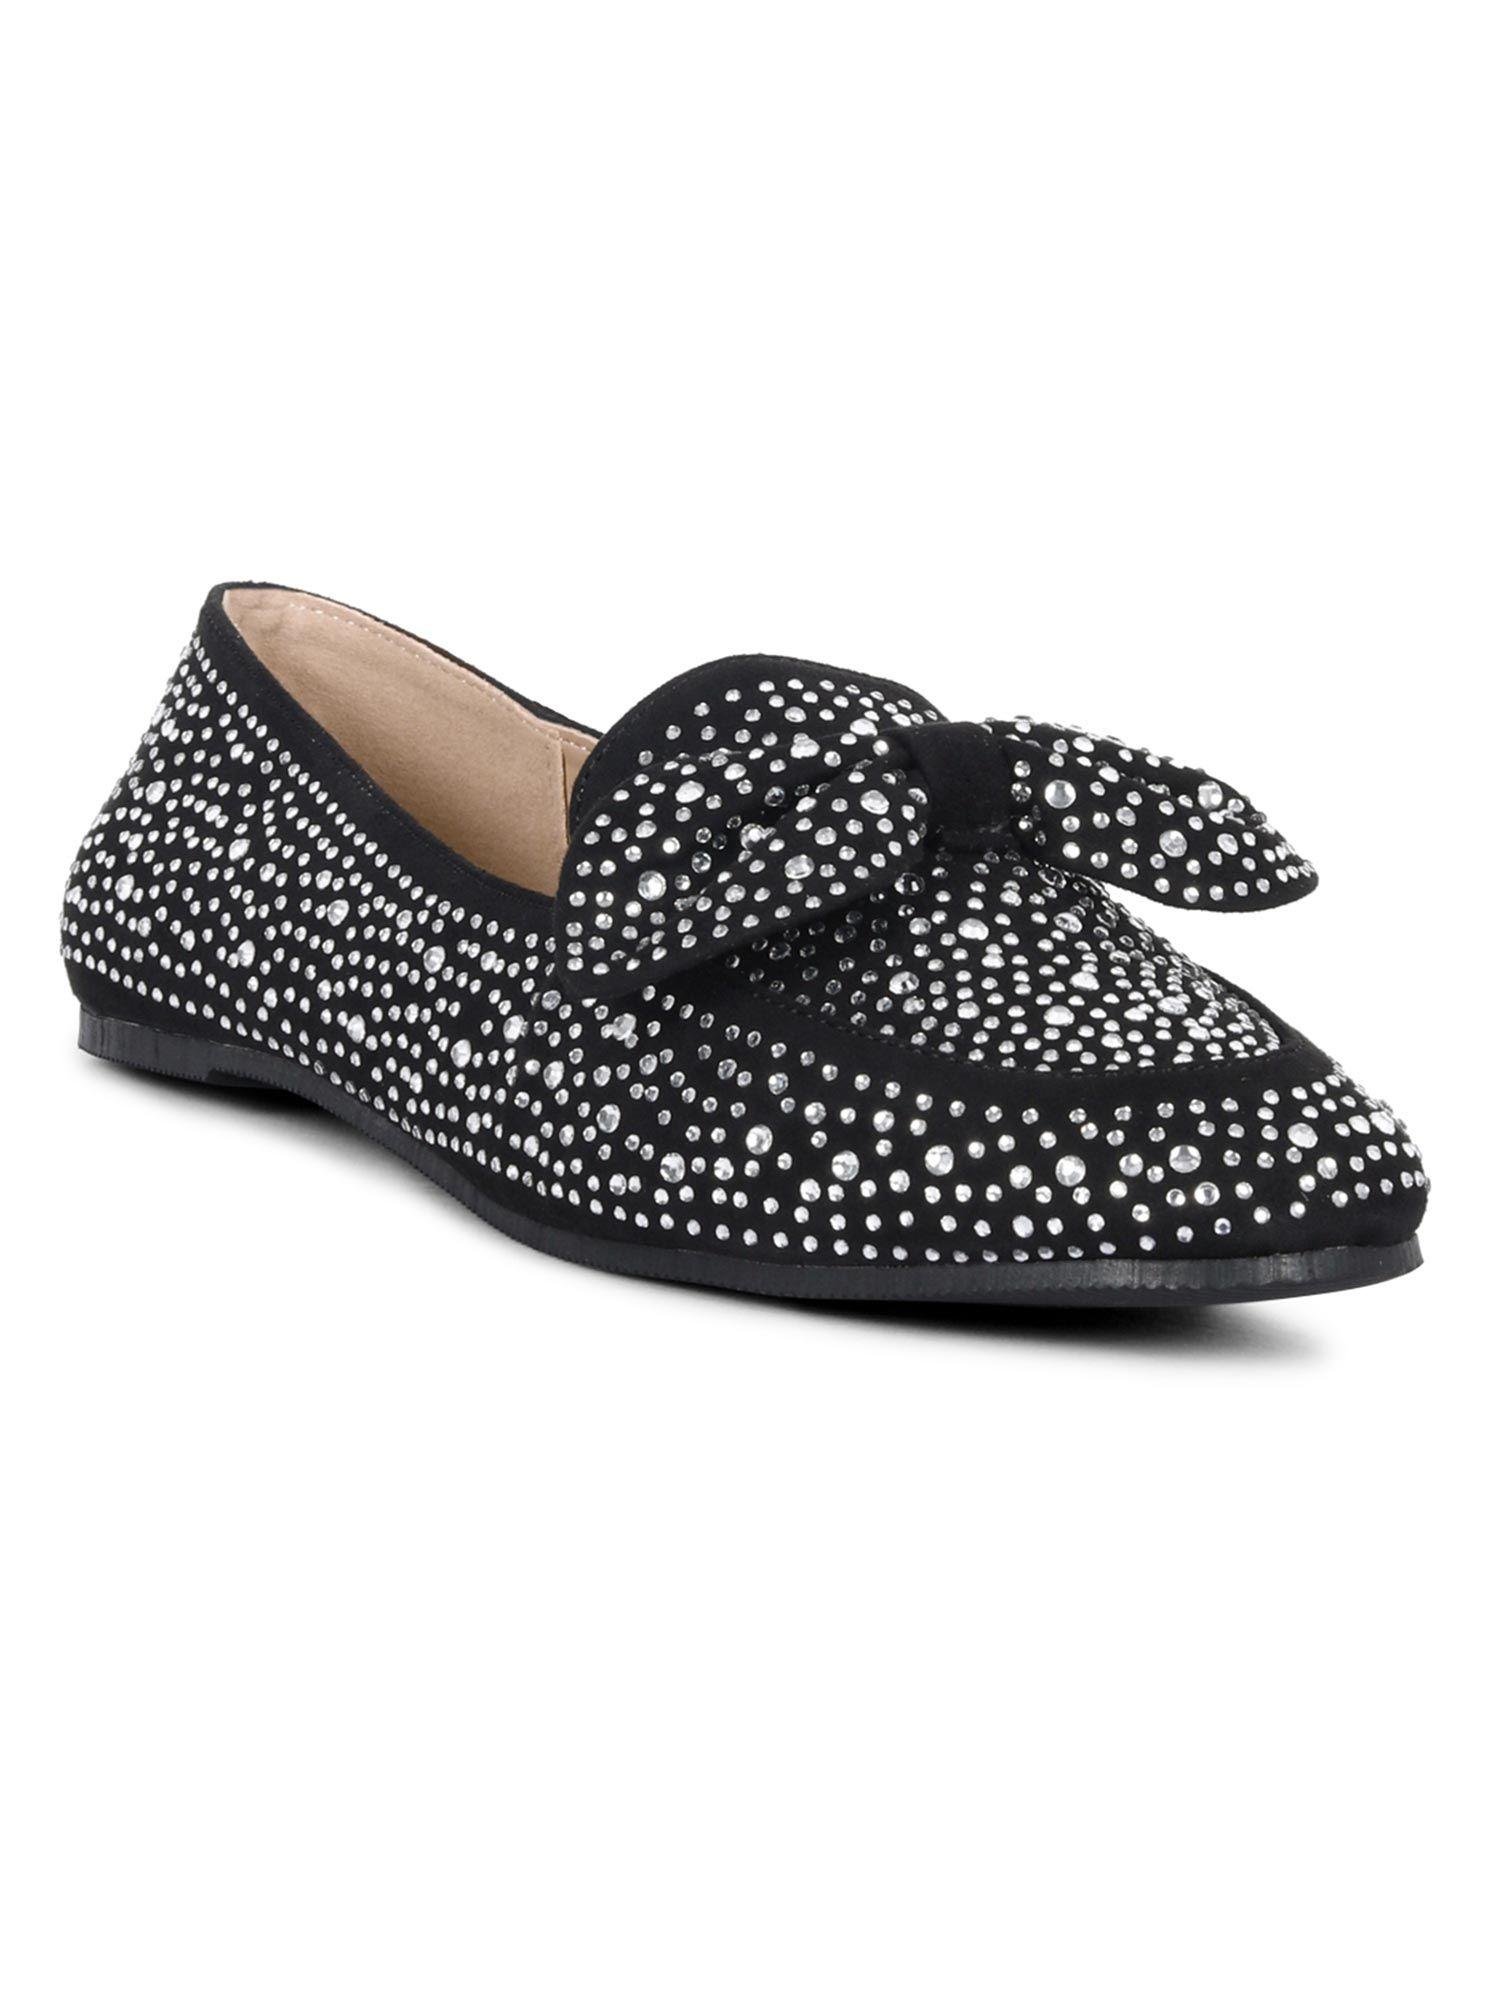 dewdrops embellished casual bow loafer in black